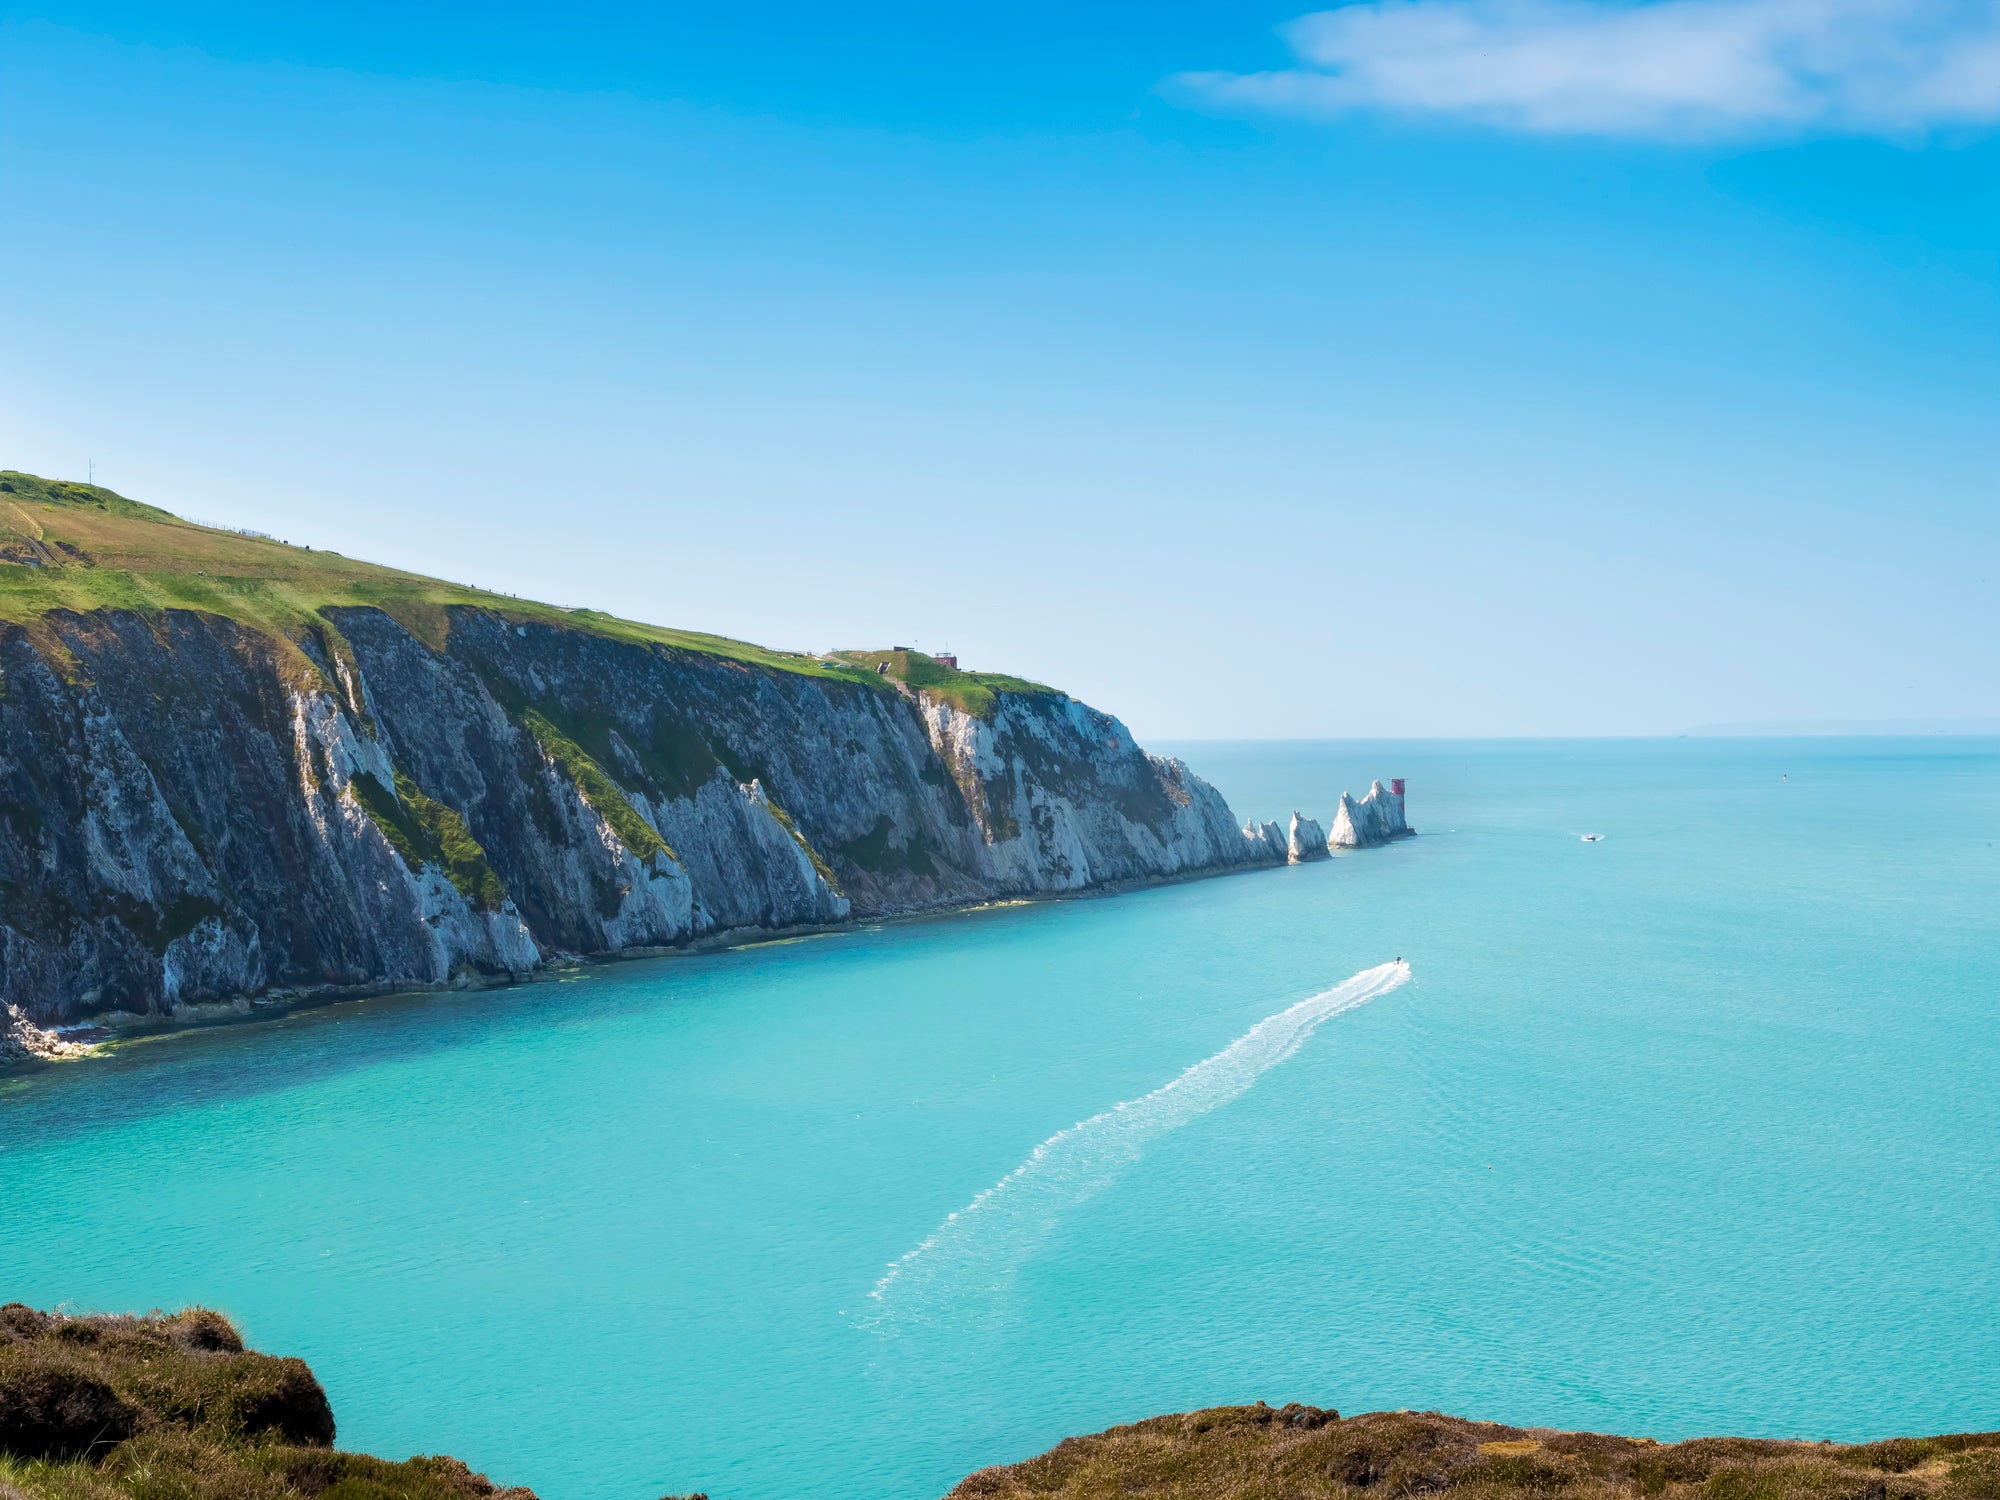 The Needles are one of the icons of Isle of Wight